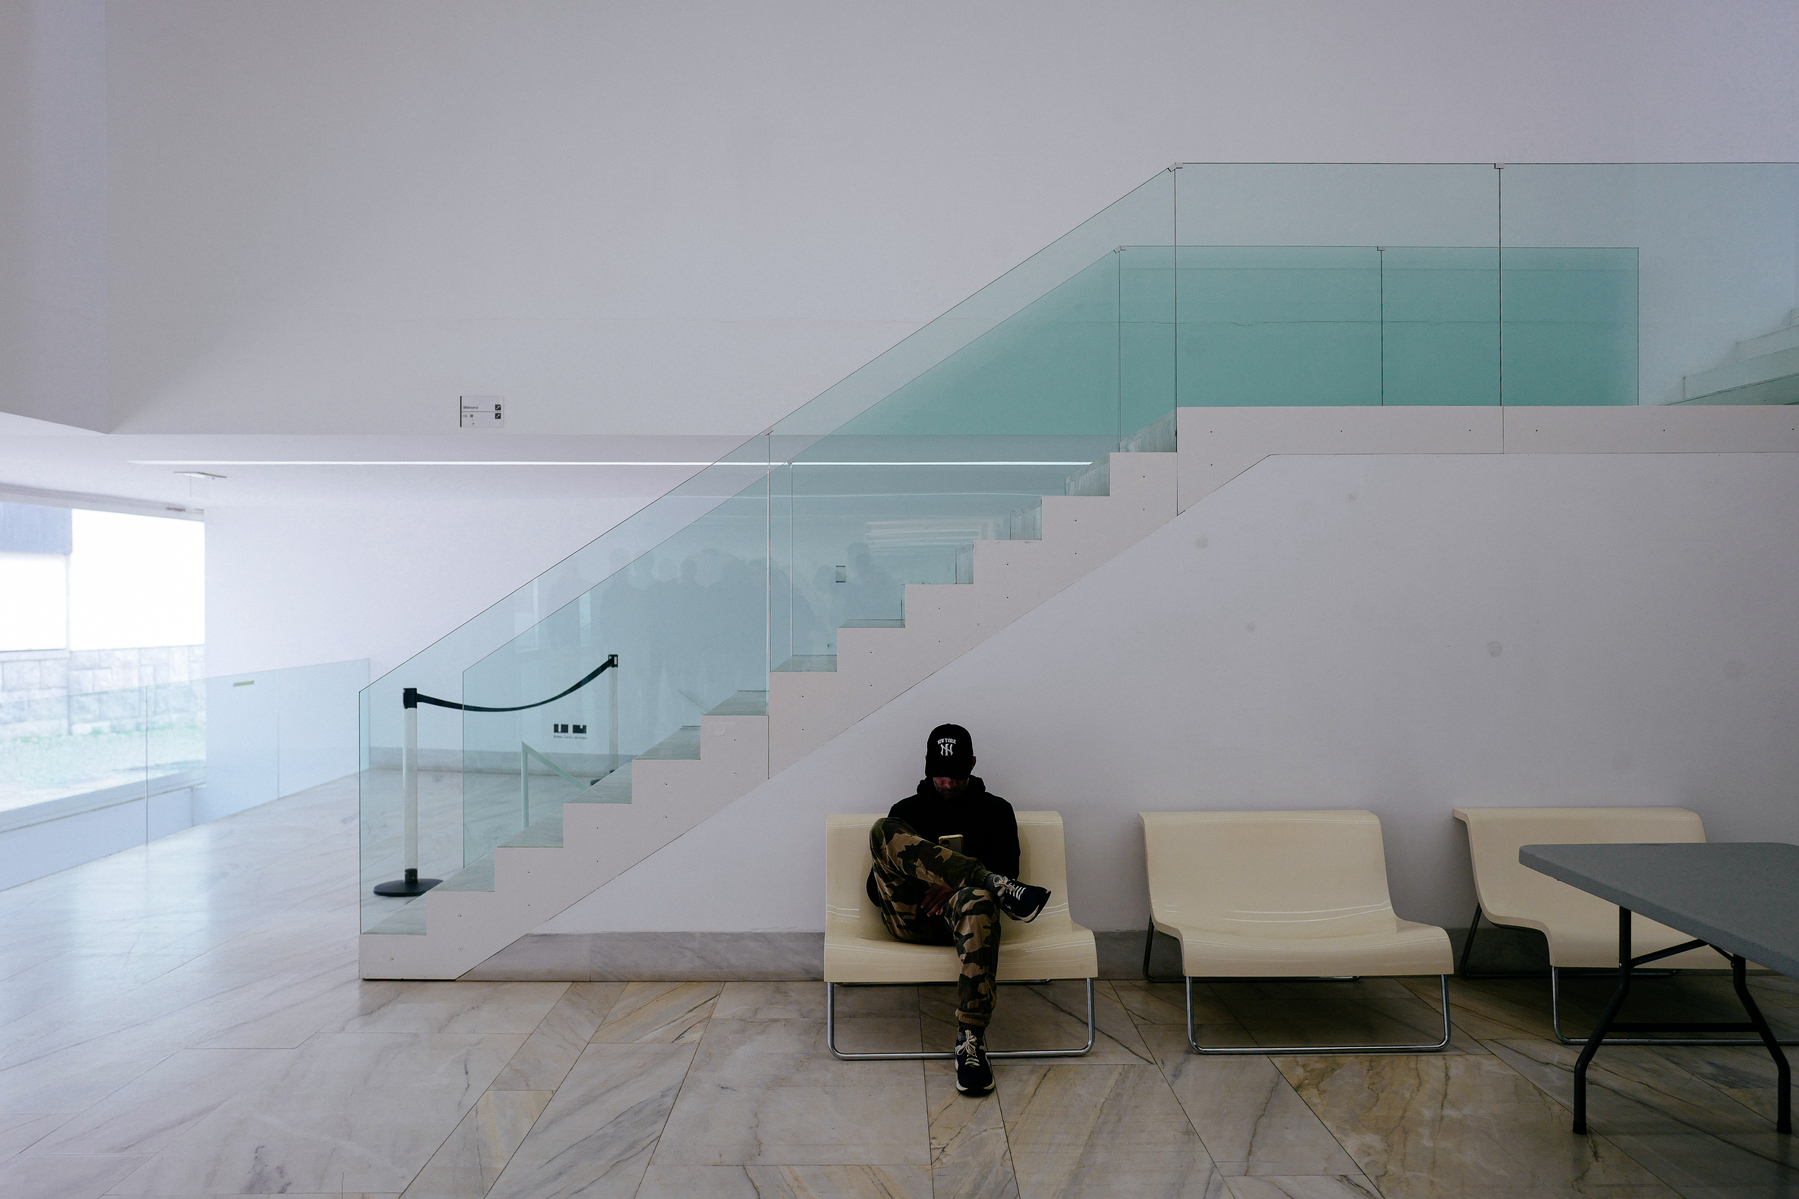 An individual wearing a cap and camouflage pants is seated on a chair in a modern interior with a glass-paneled staircase, white walls, and marble flooring. There are two empty chairs and a table beside them.